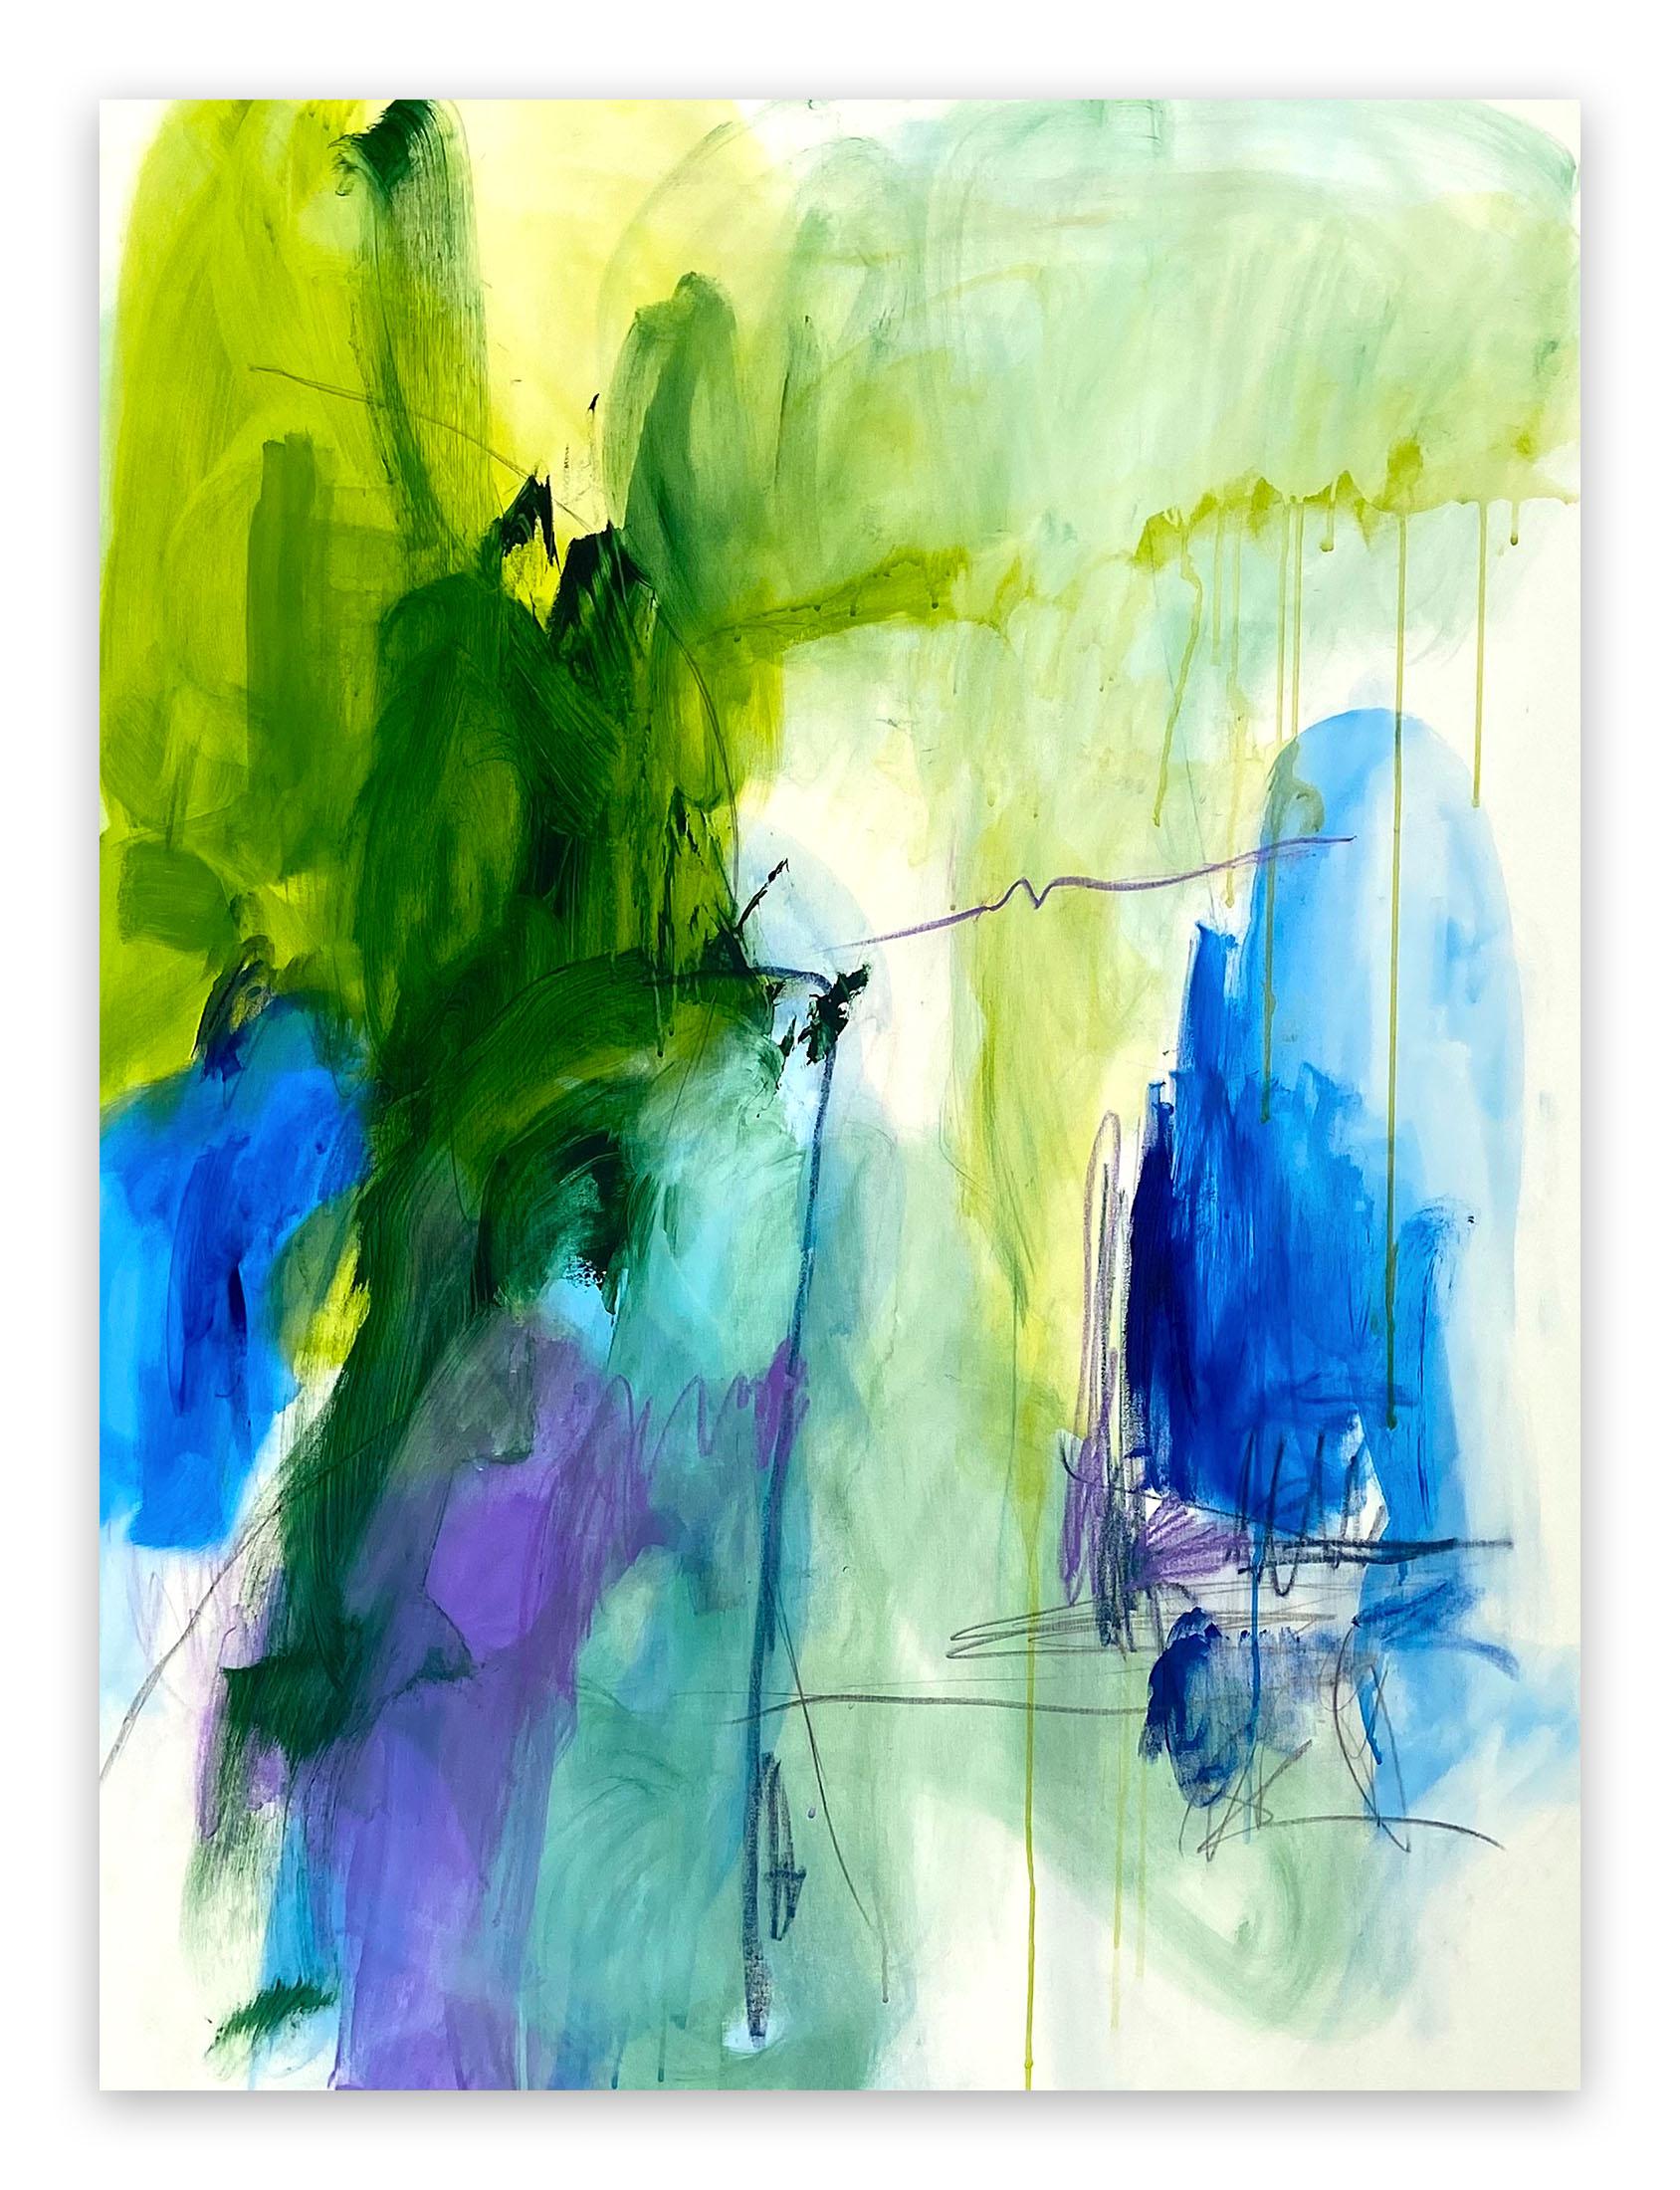 Vertical garden 2 (Abstract painting)